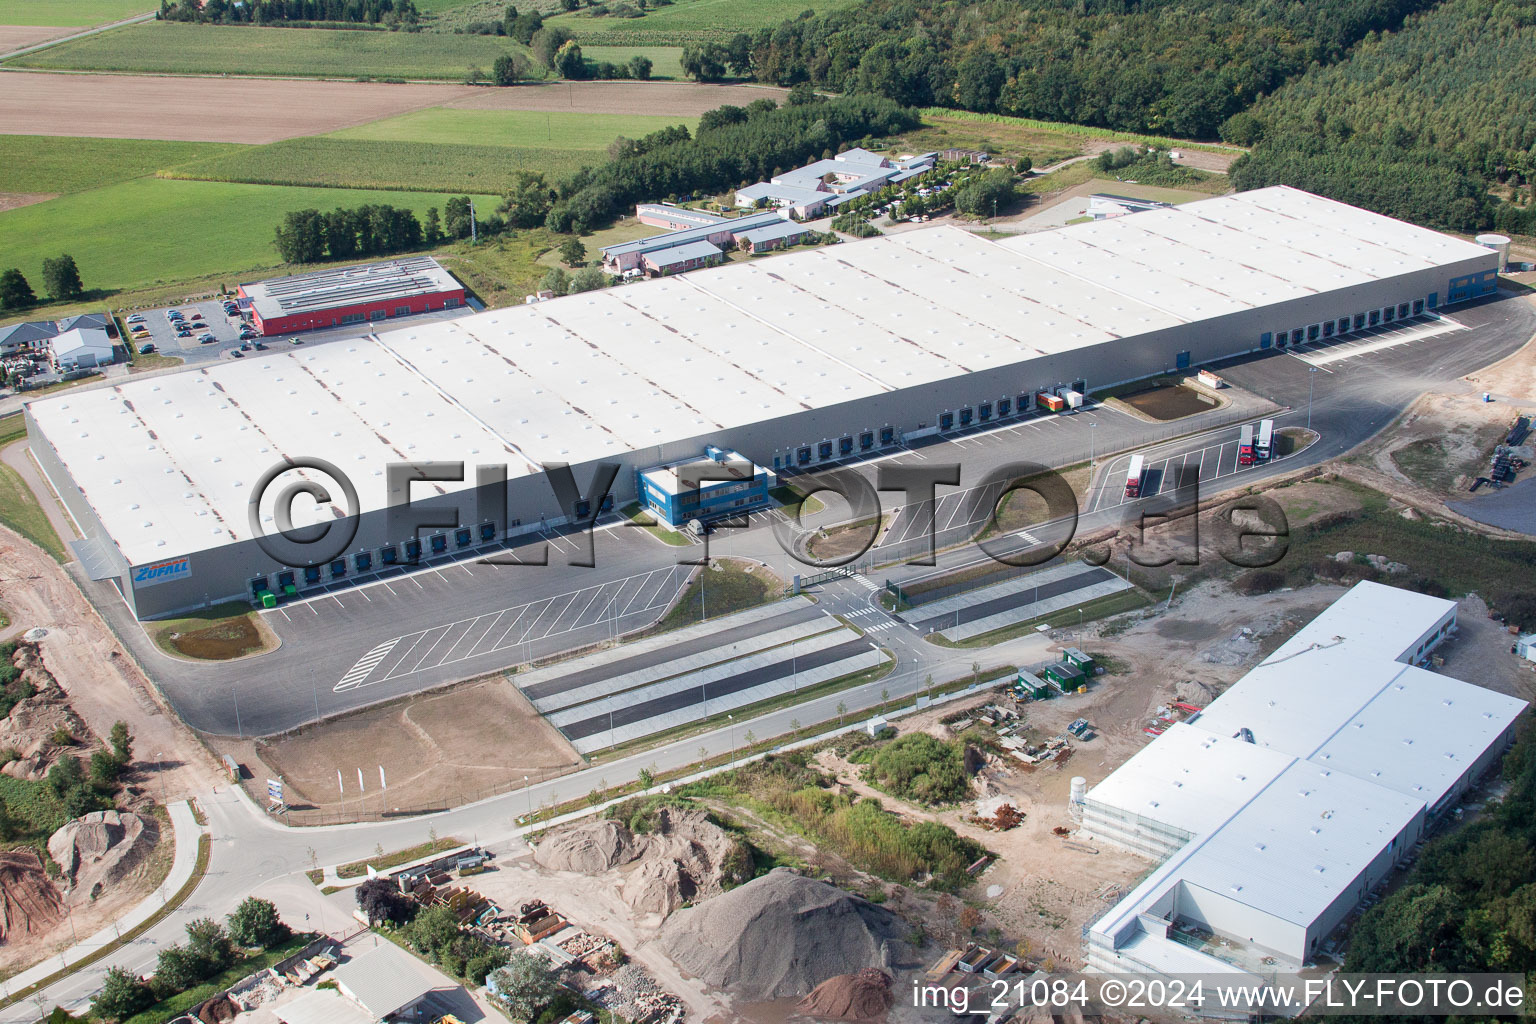 Aerial view of Building complex and grounds of the logistics center Zufall in the district Gewerbegebiet Horst in Kandel in the state Rhineland-Palatinate